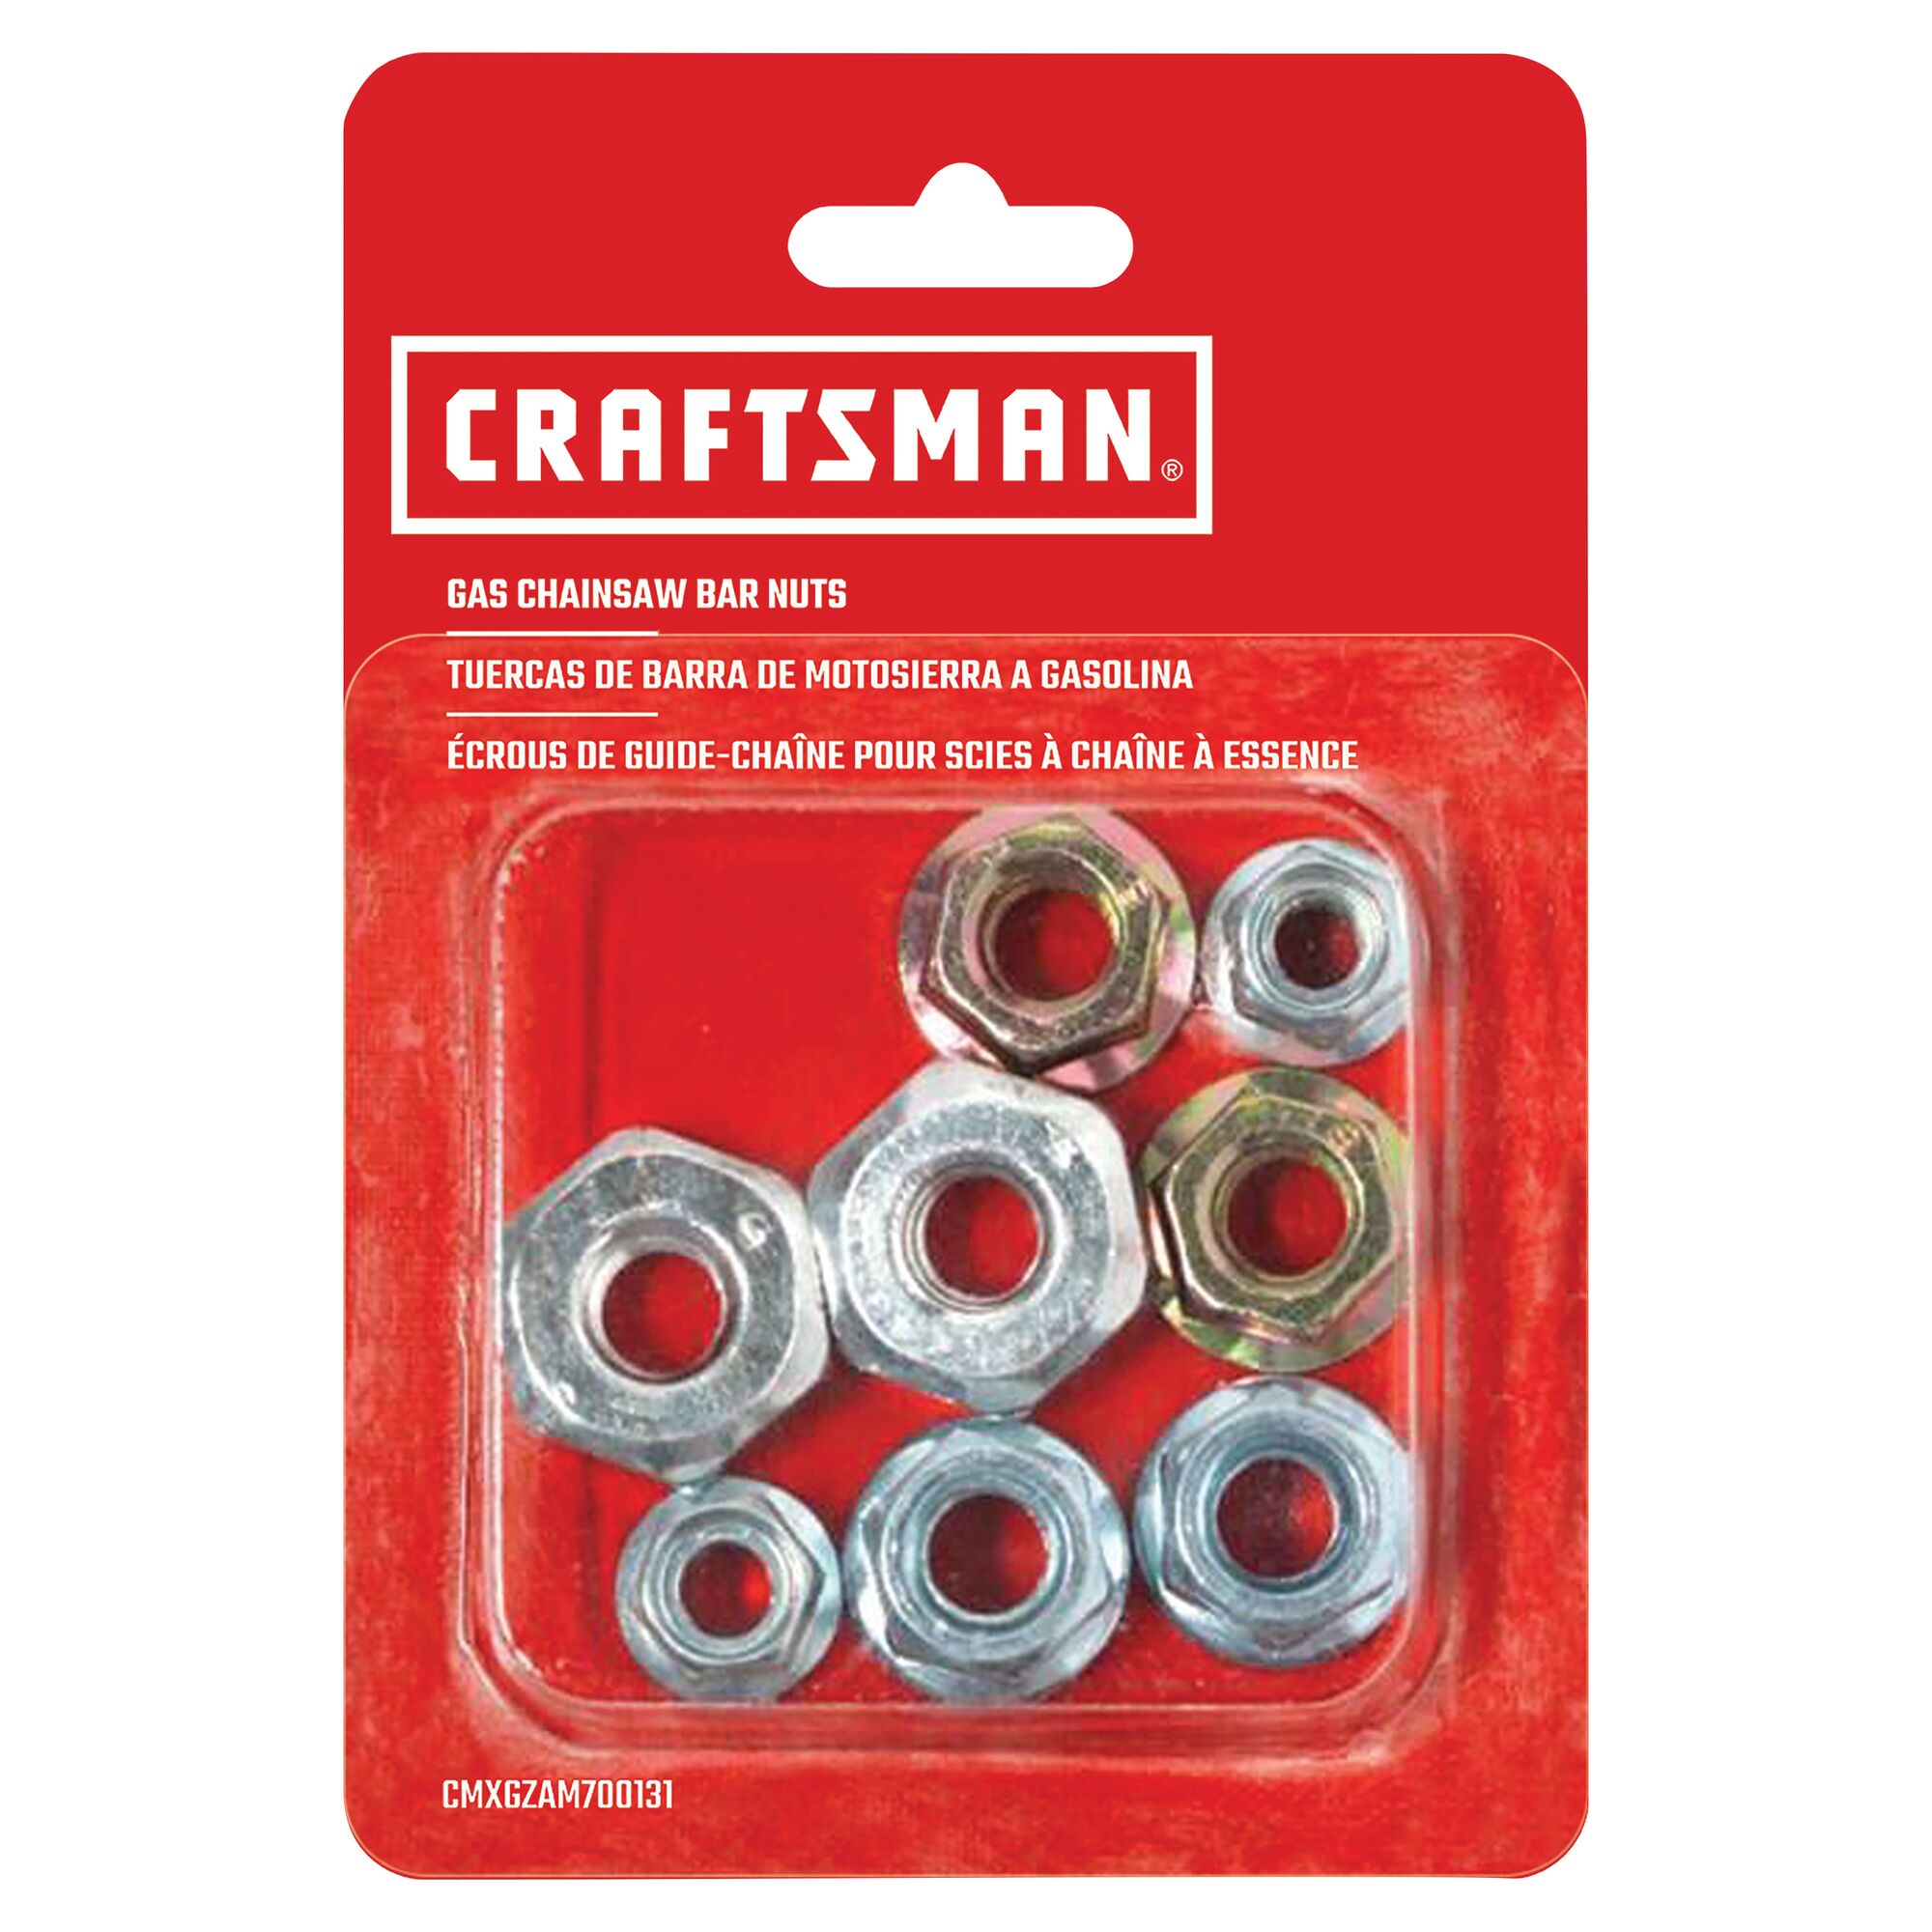 Chainsaw bar nuts in cardboard packaging.